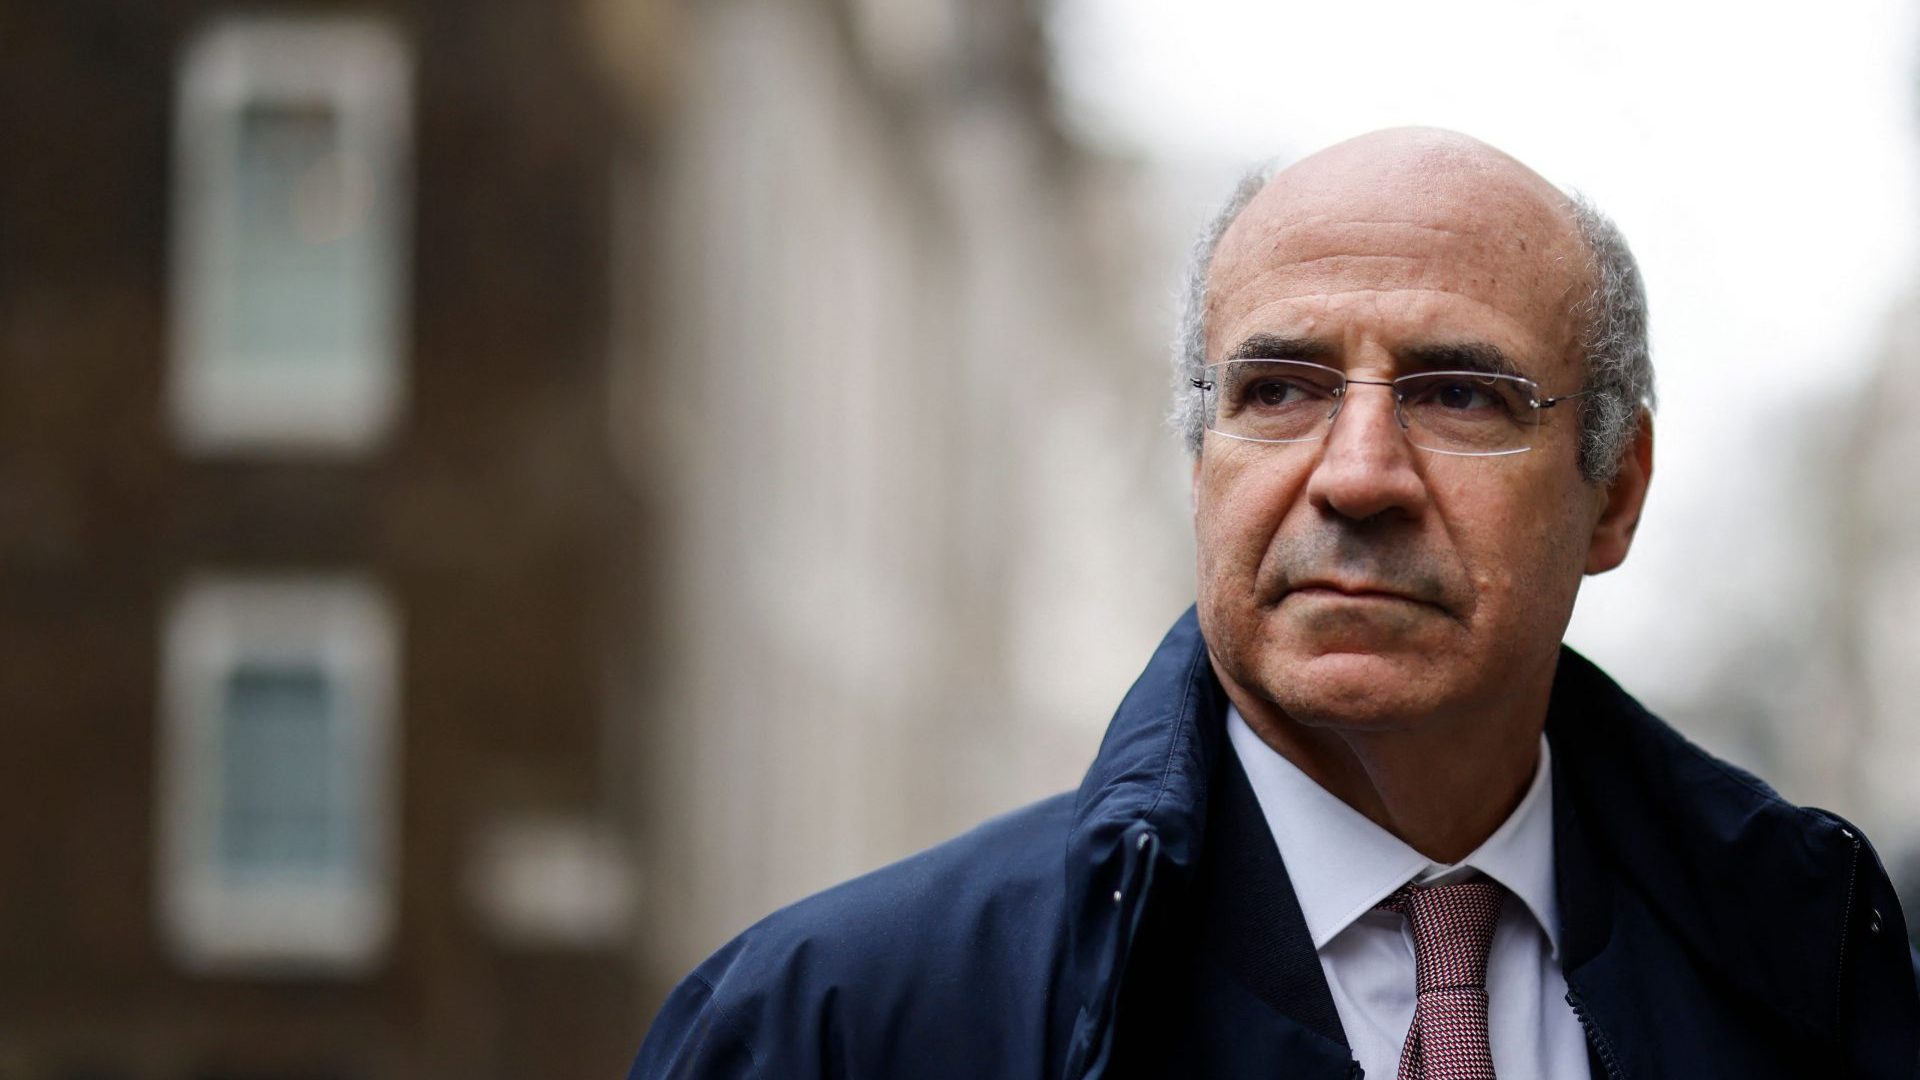 American-born British financier and political activist Bill Browder poses for pictures in front of 10 Downing street. Photo: TOLGA AKMEN/AFP via Getty Images